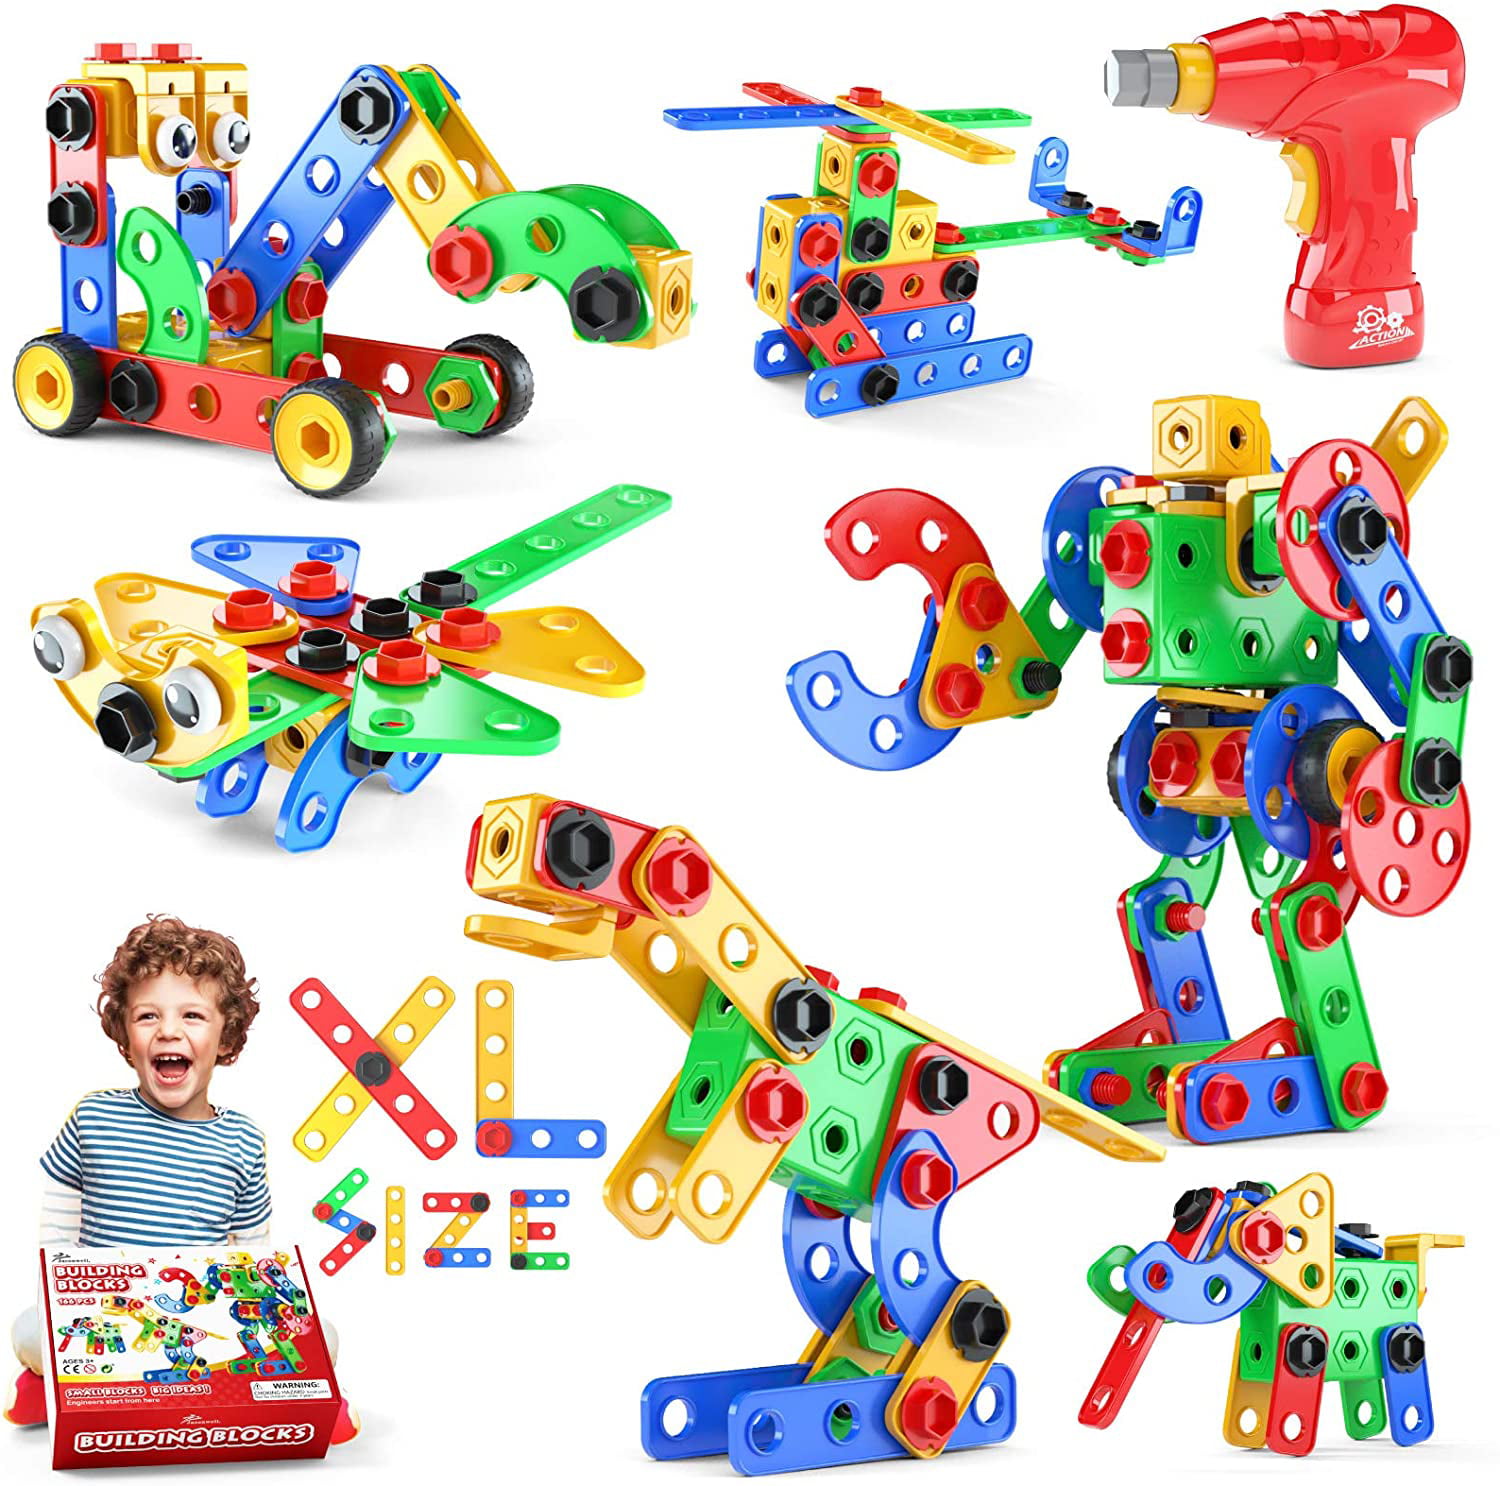 Best Creative DIY Toy Gift for Boys and Girls STEM Educational Preschool Learning Toy for Kids Wooden Building Blocks Set for Toddler